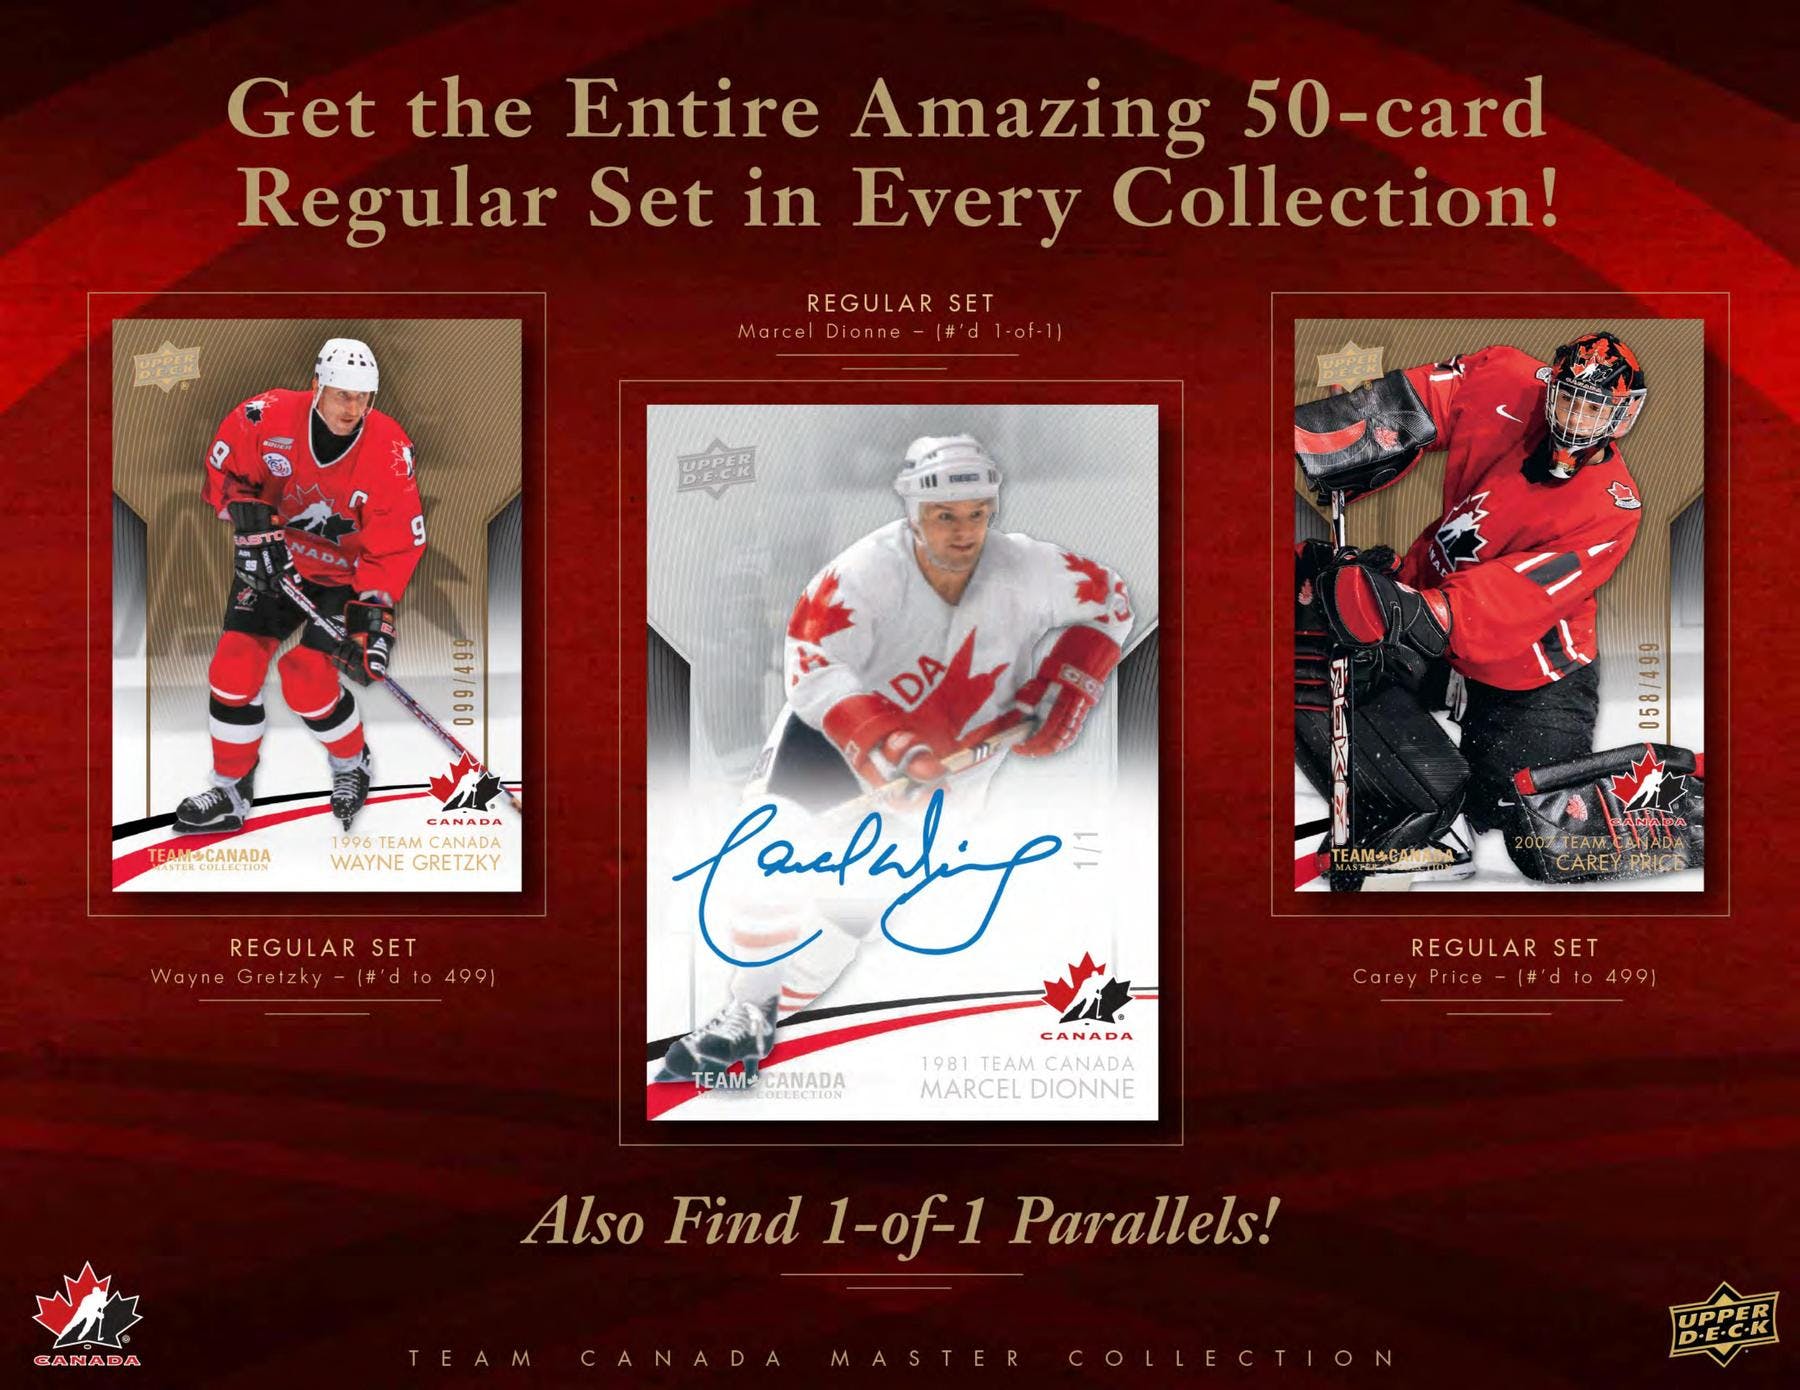 2015-16 Upper Deck Team Canada Master Collection | Eastridge Sports Cards